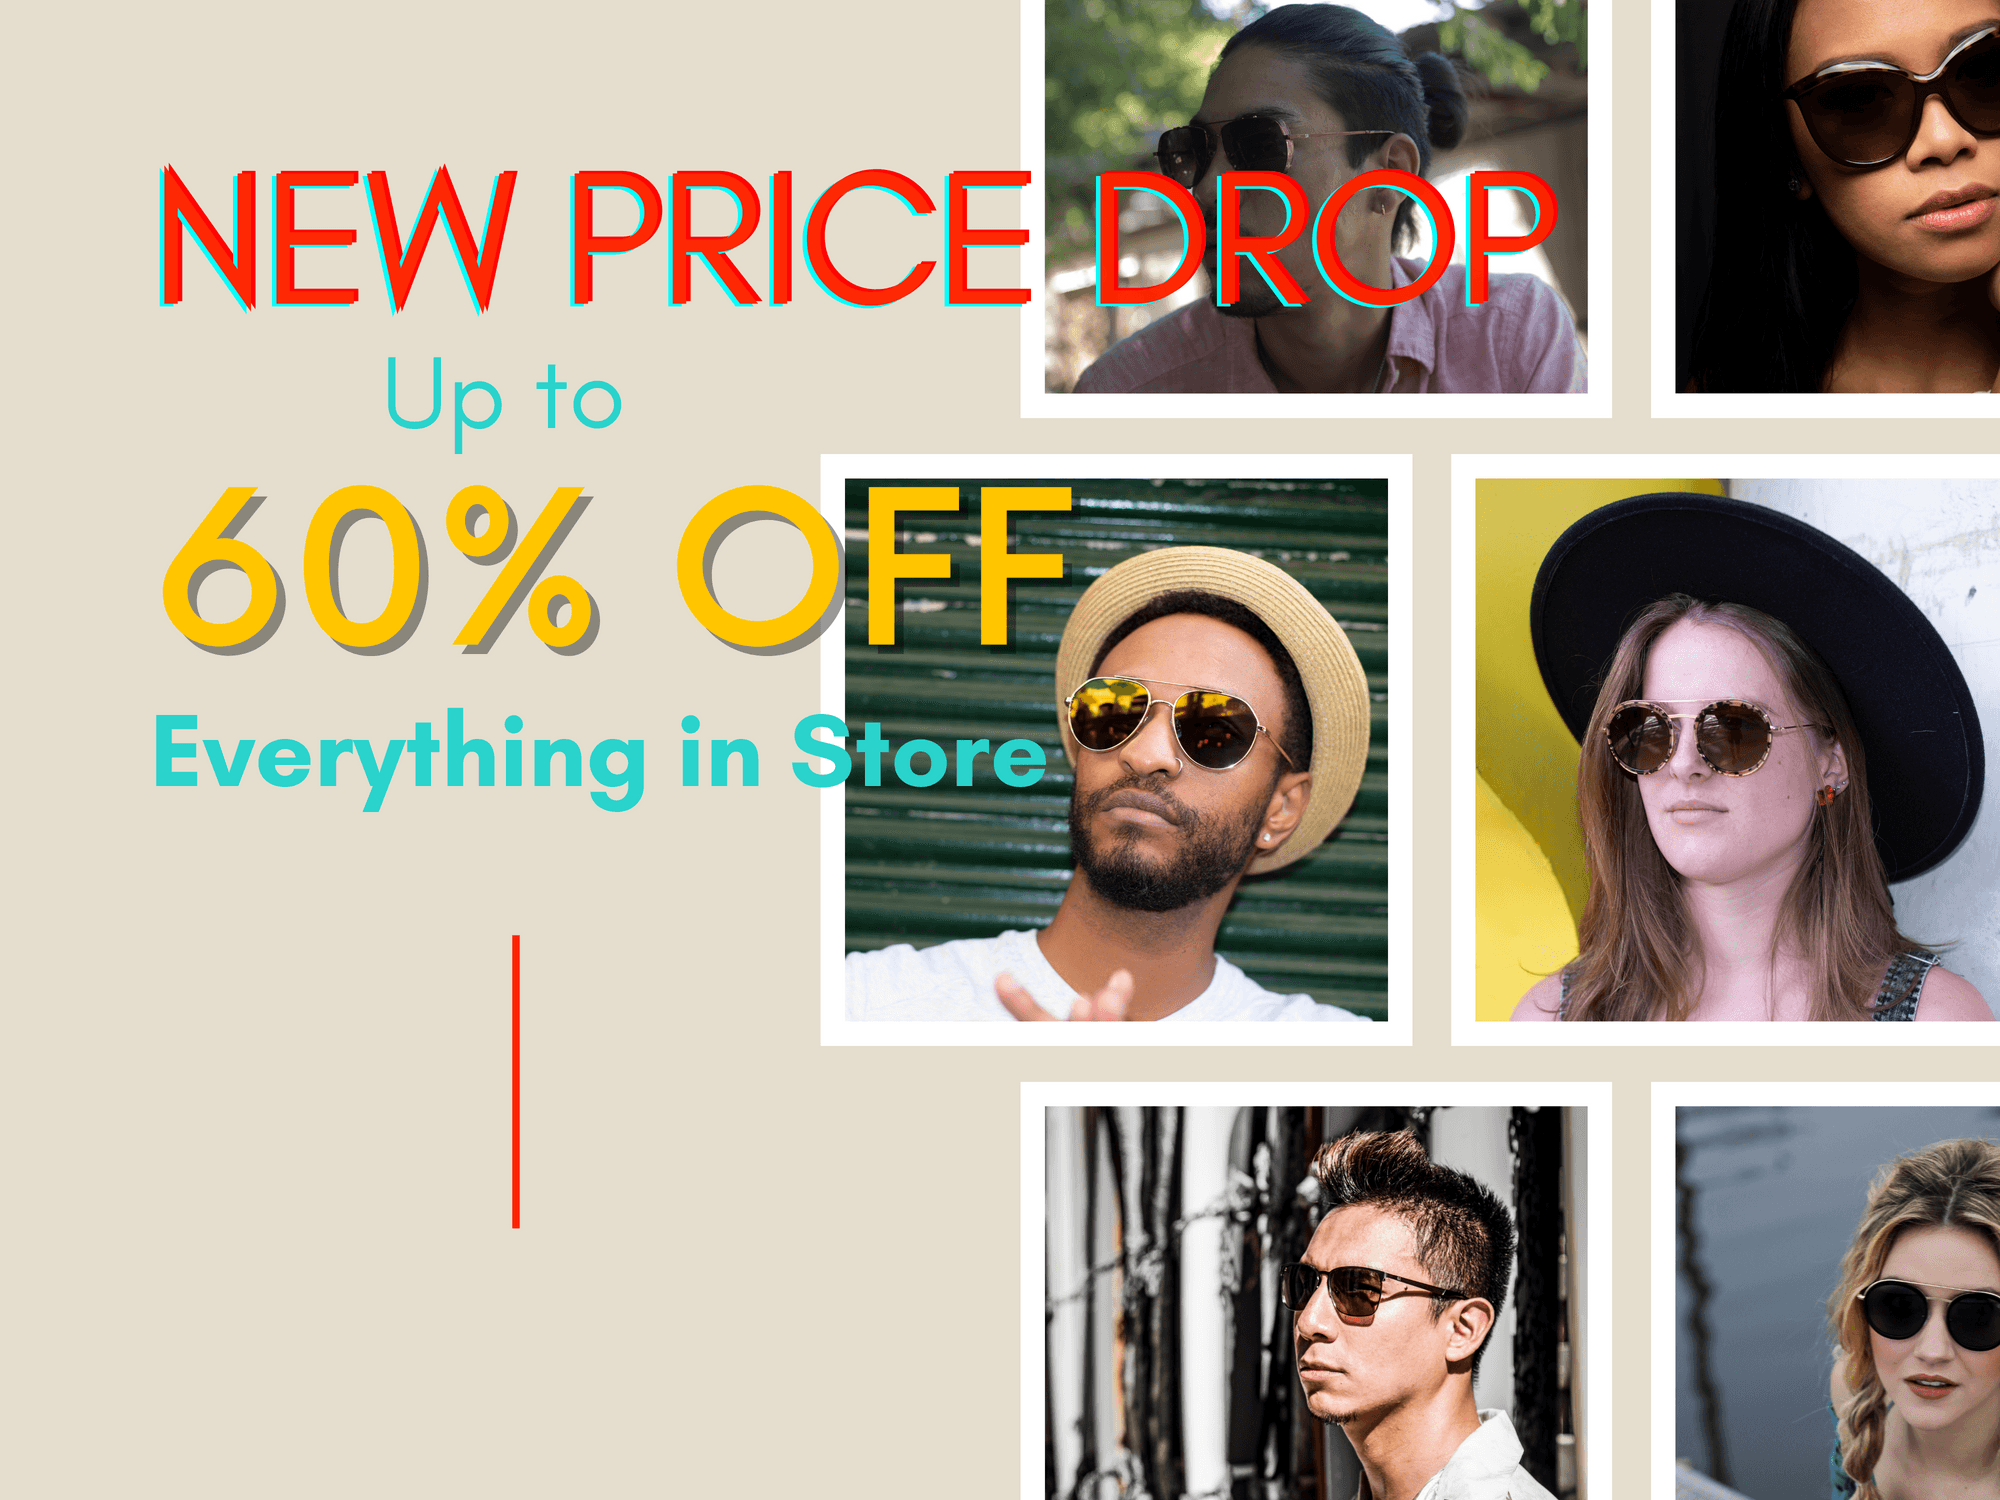 New Price Drop: Up to 60% Off Everything in Store